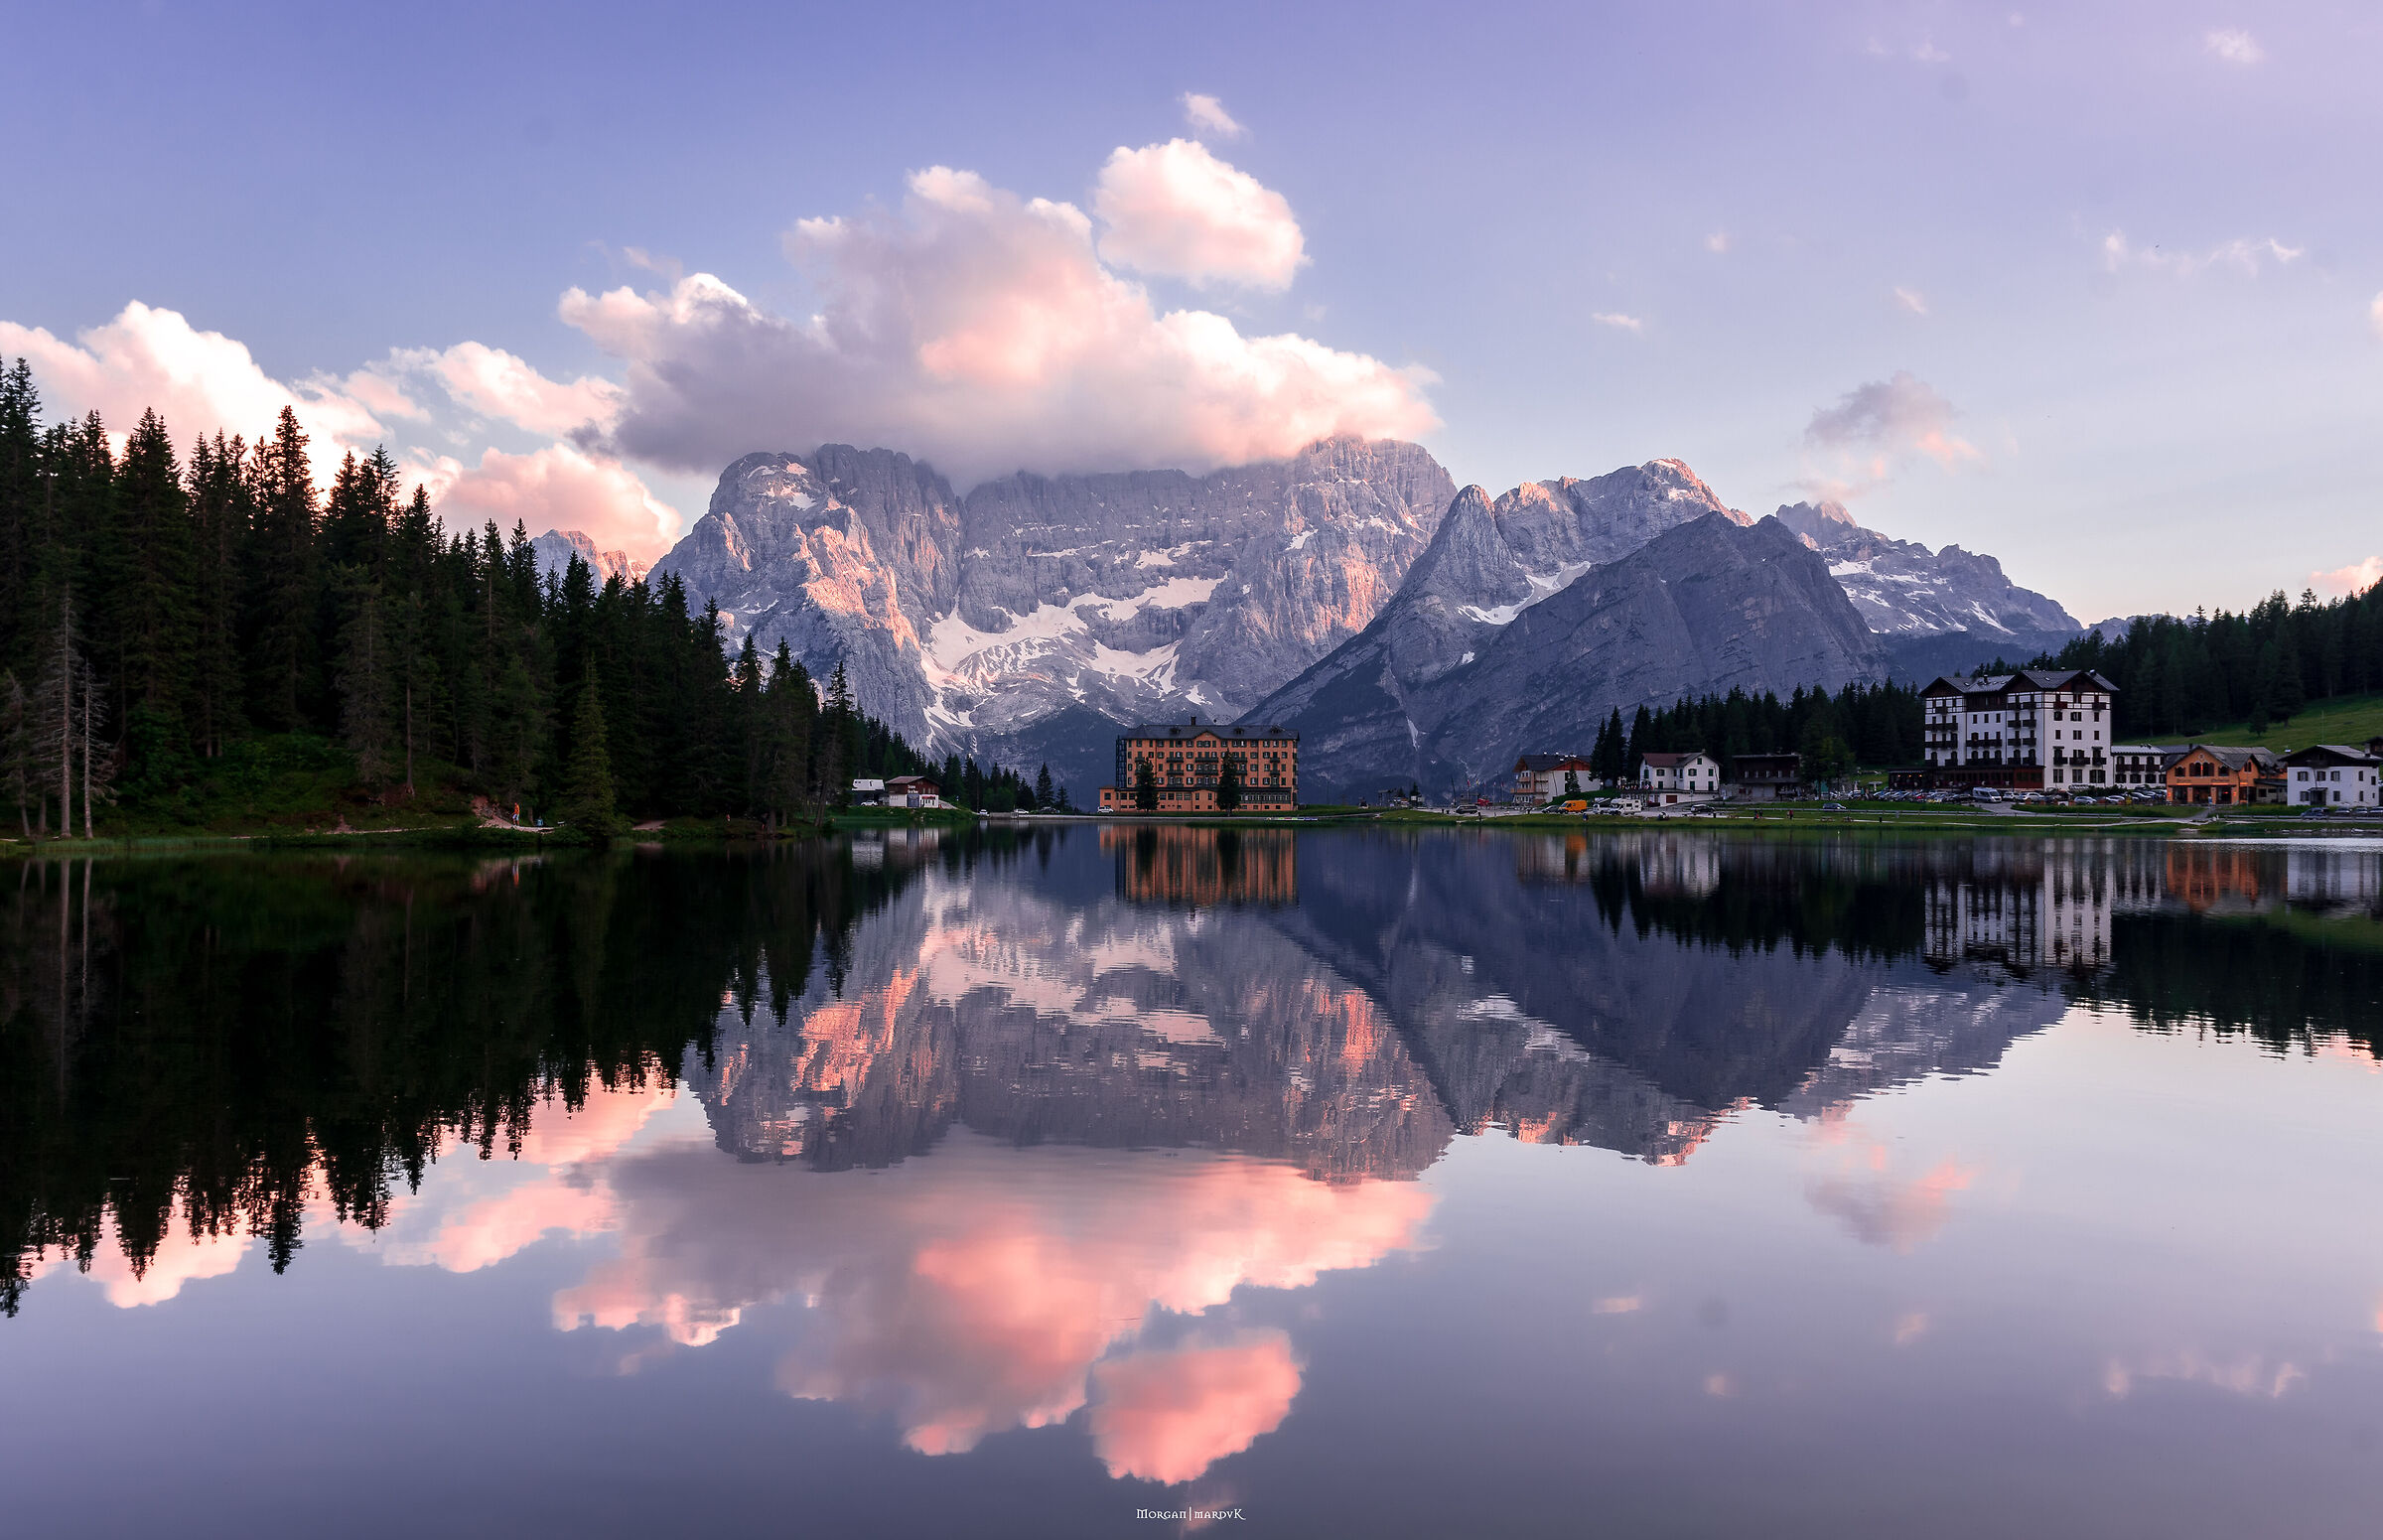 Lake Misurina and the Sorapiss Group in the background...